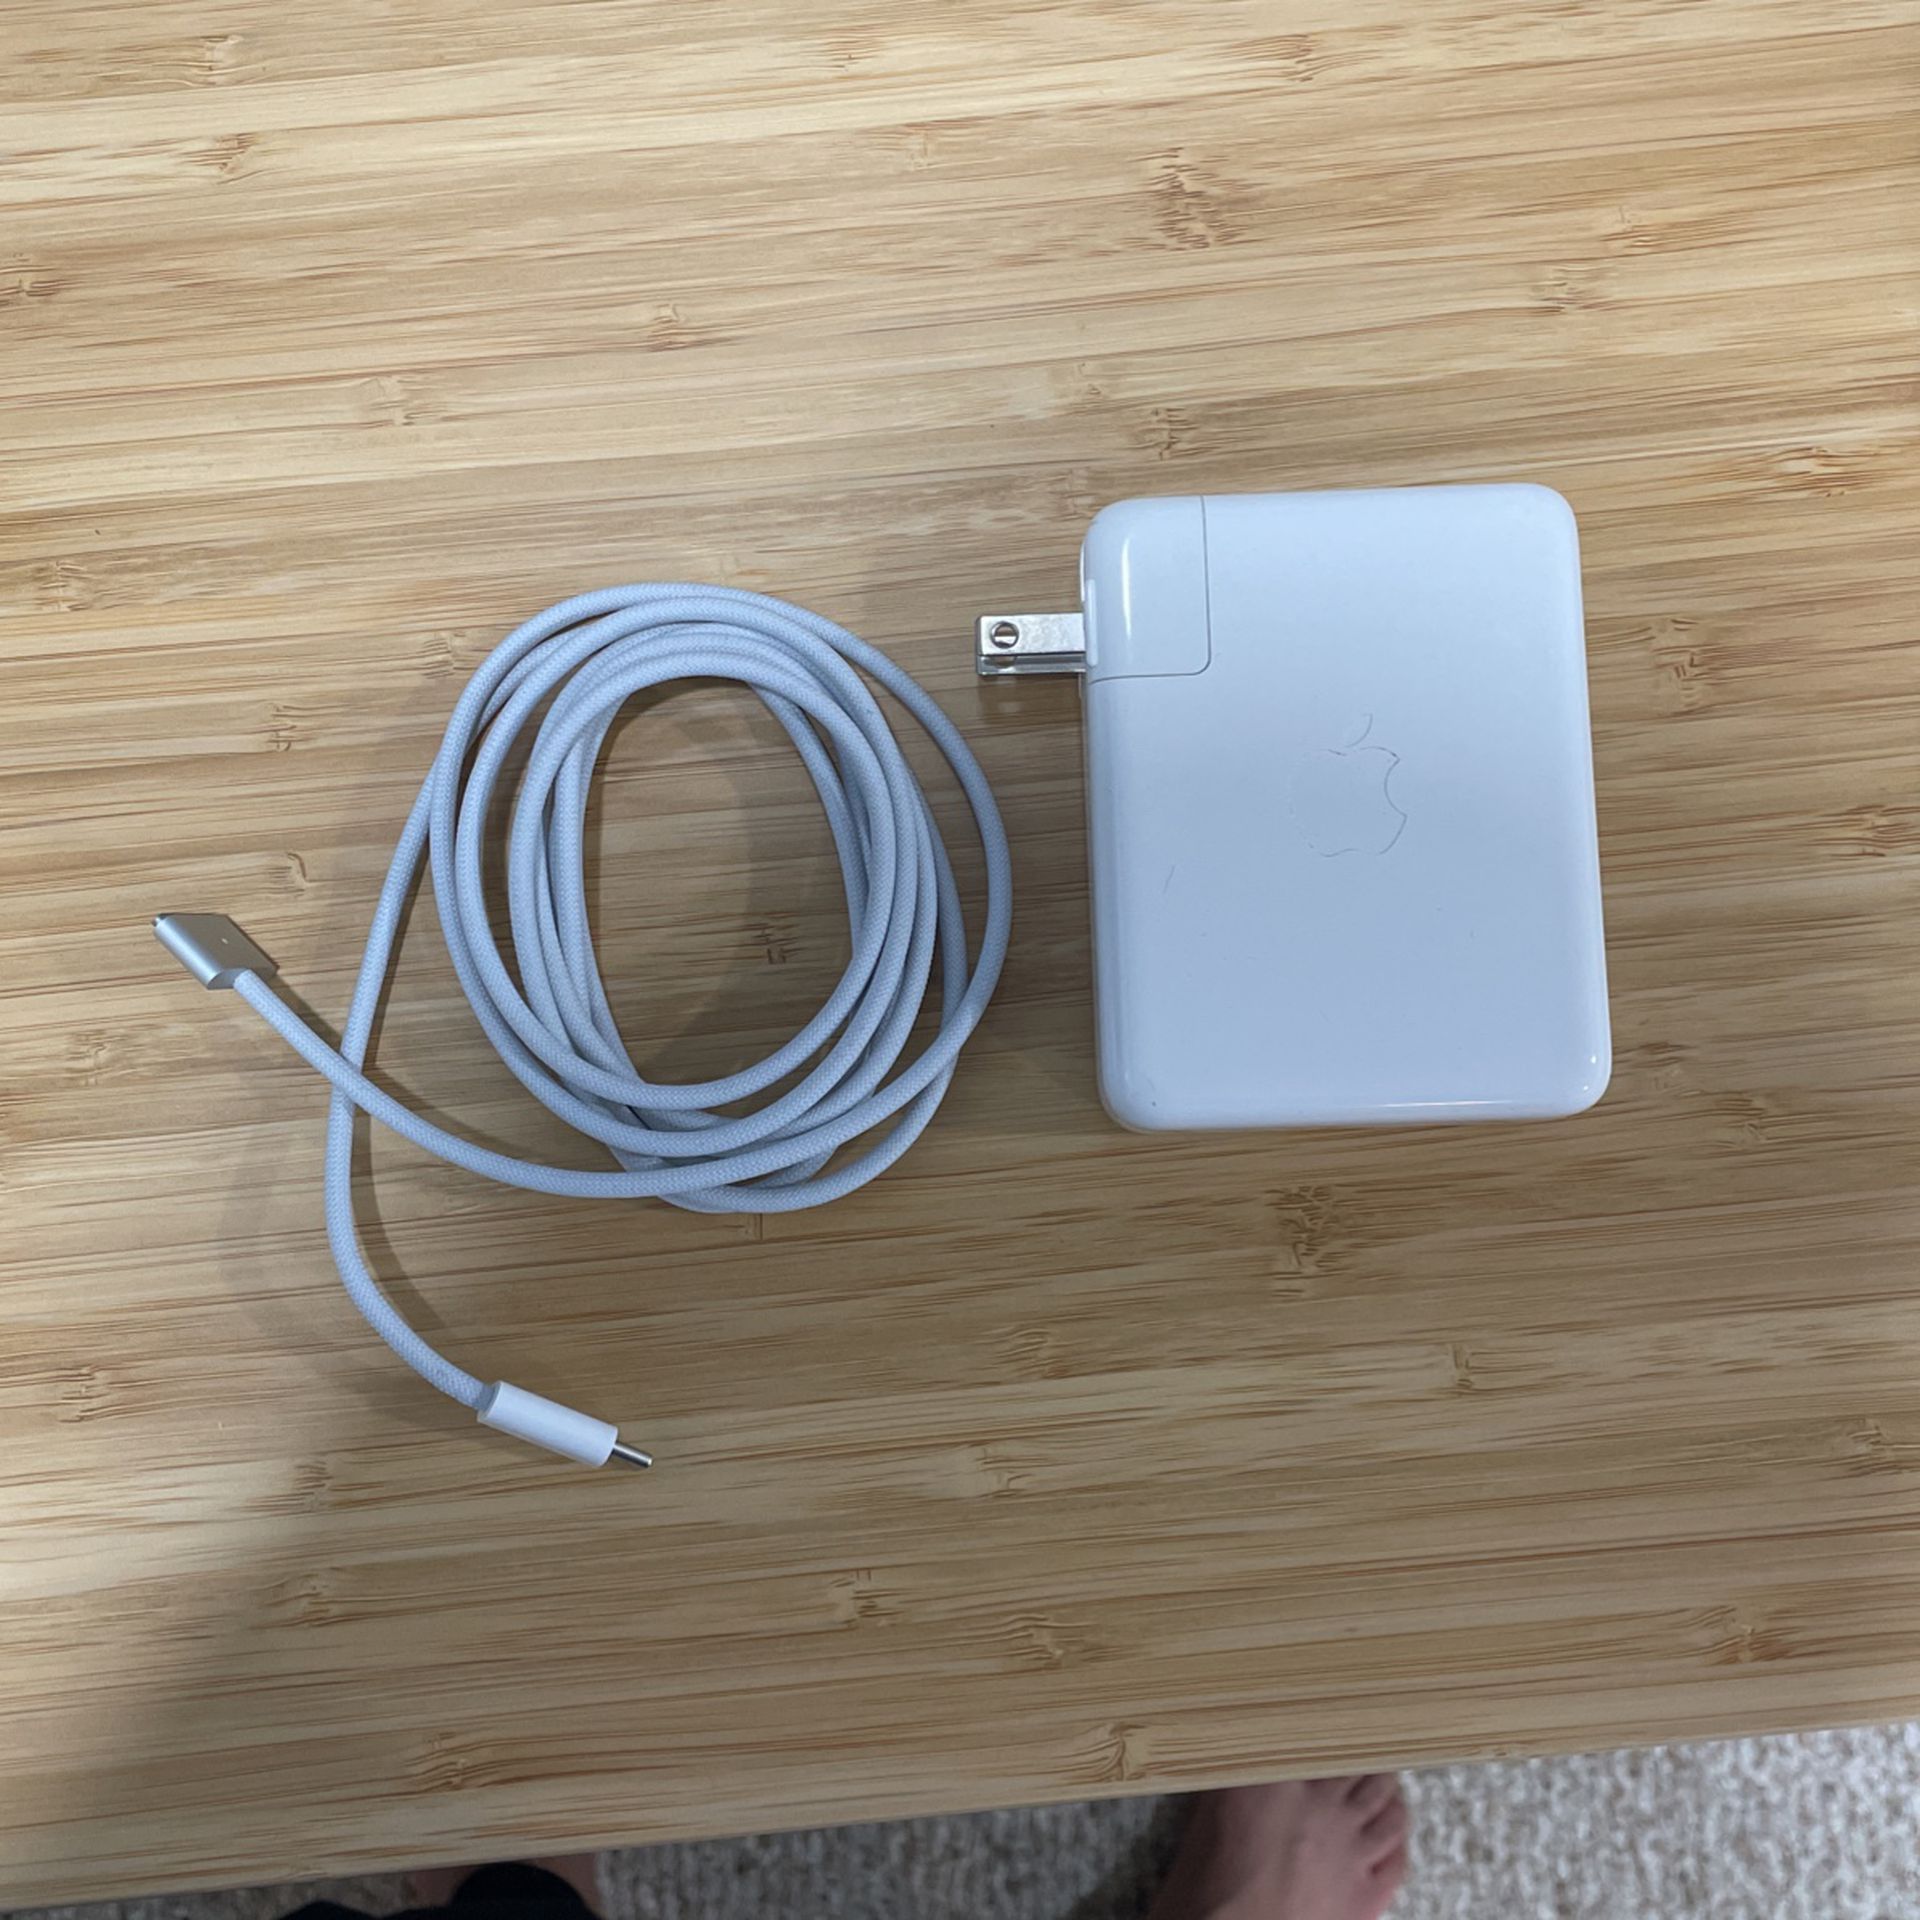 New Apple 140W MacBook Pro Charger